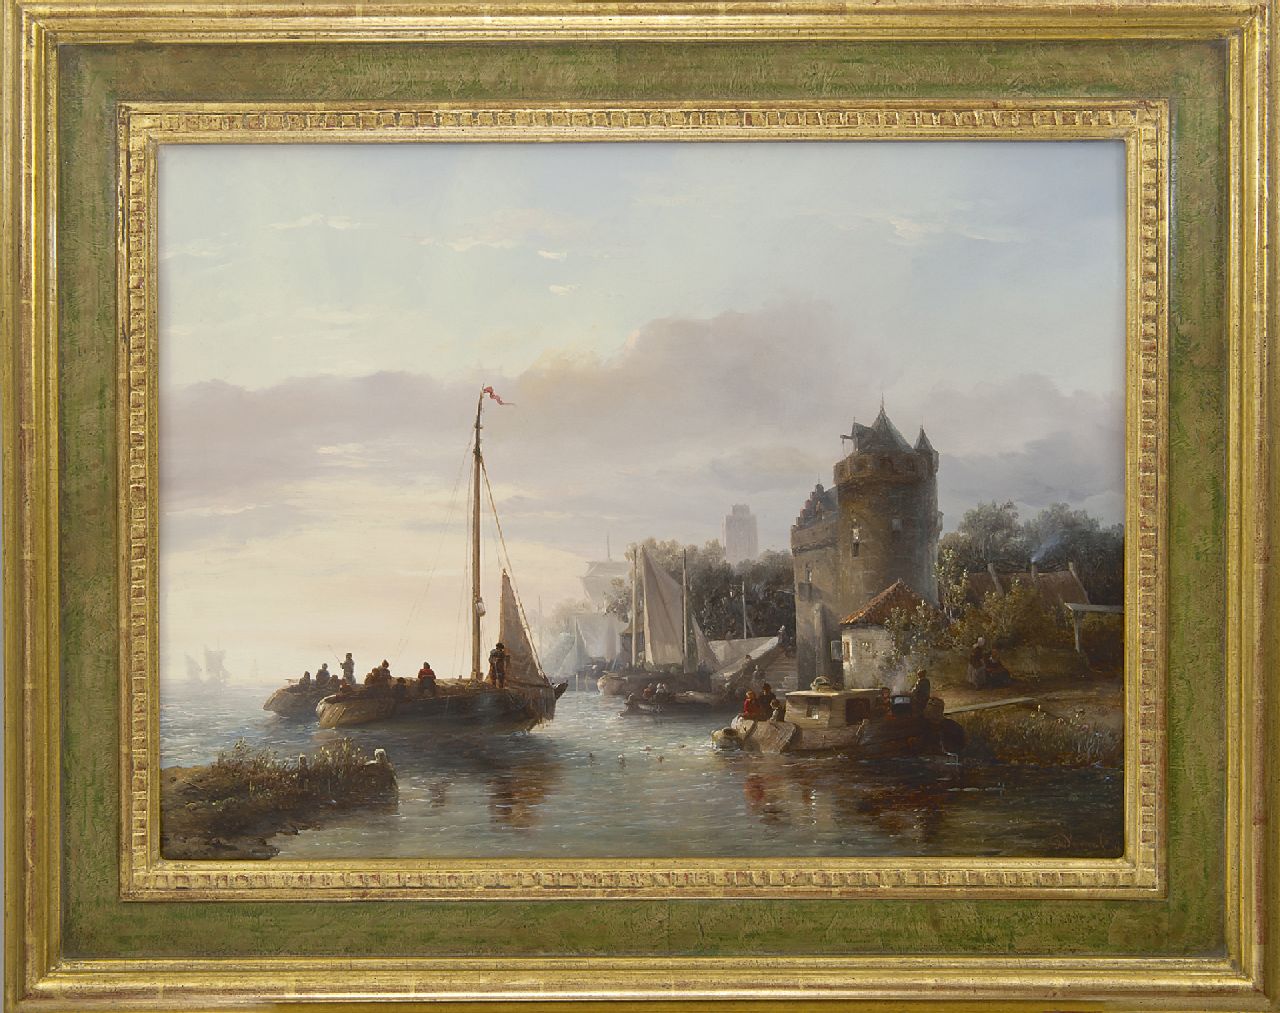 Verveer S.L.  | 'Salomon' Leonardus Verveer, Activity on the river, the Grote Kerk of Dordrecht in the distance, oil on panel 42.8 x 57.9 cm, signed l.r. and dated '47